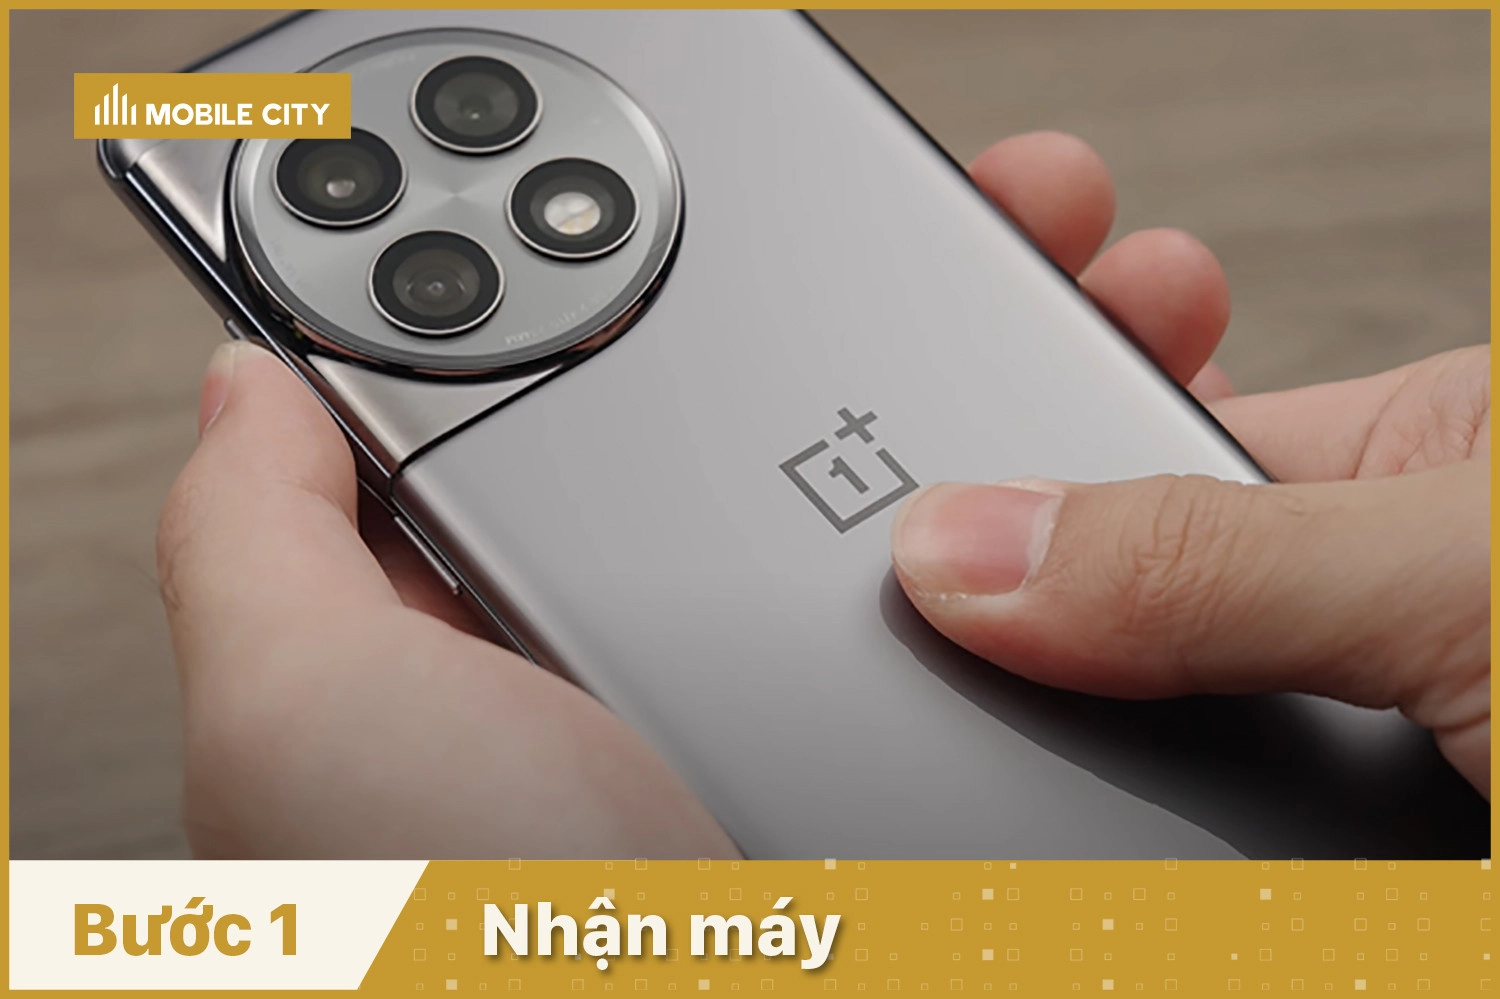 thay-kinh-lung-thay-mat-kinh-sau-oneplus-ace-2-pro-nhan-may